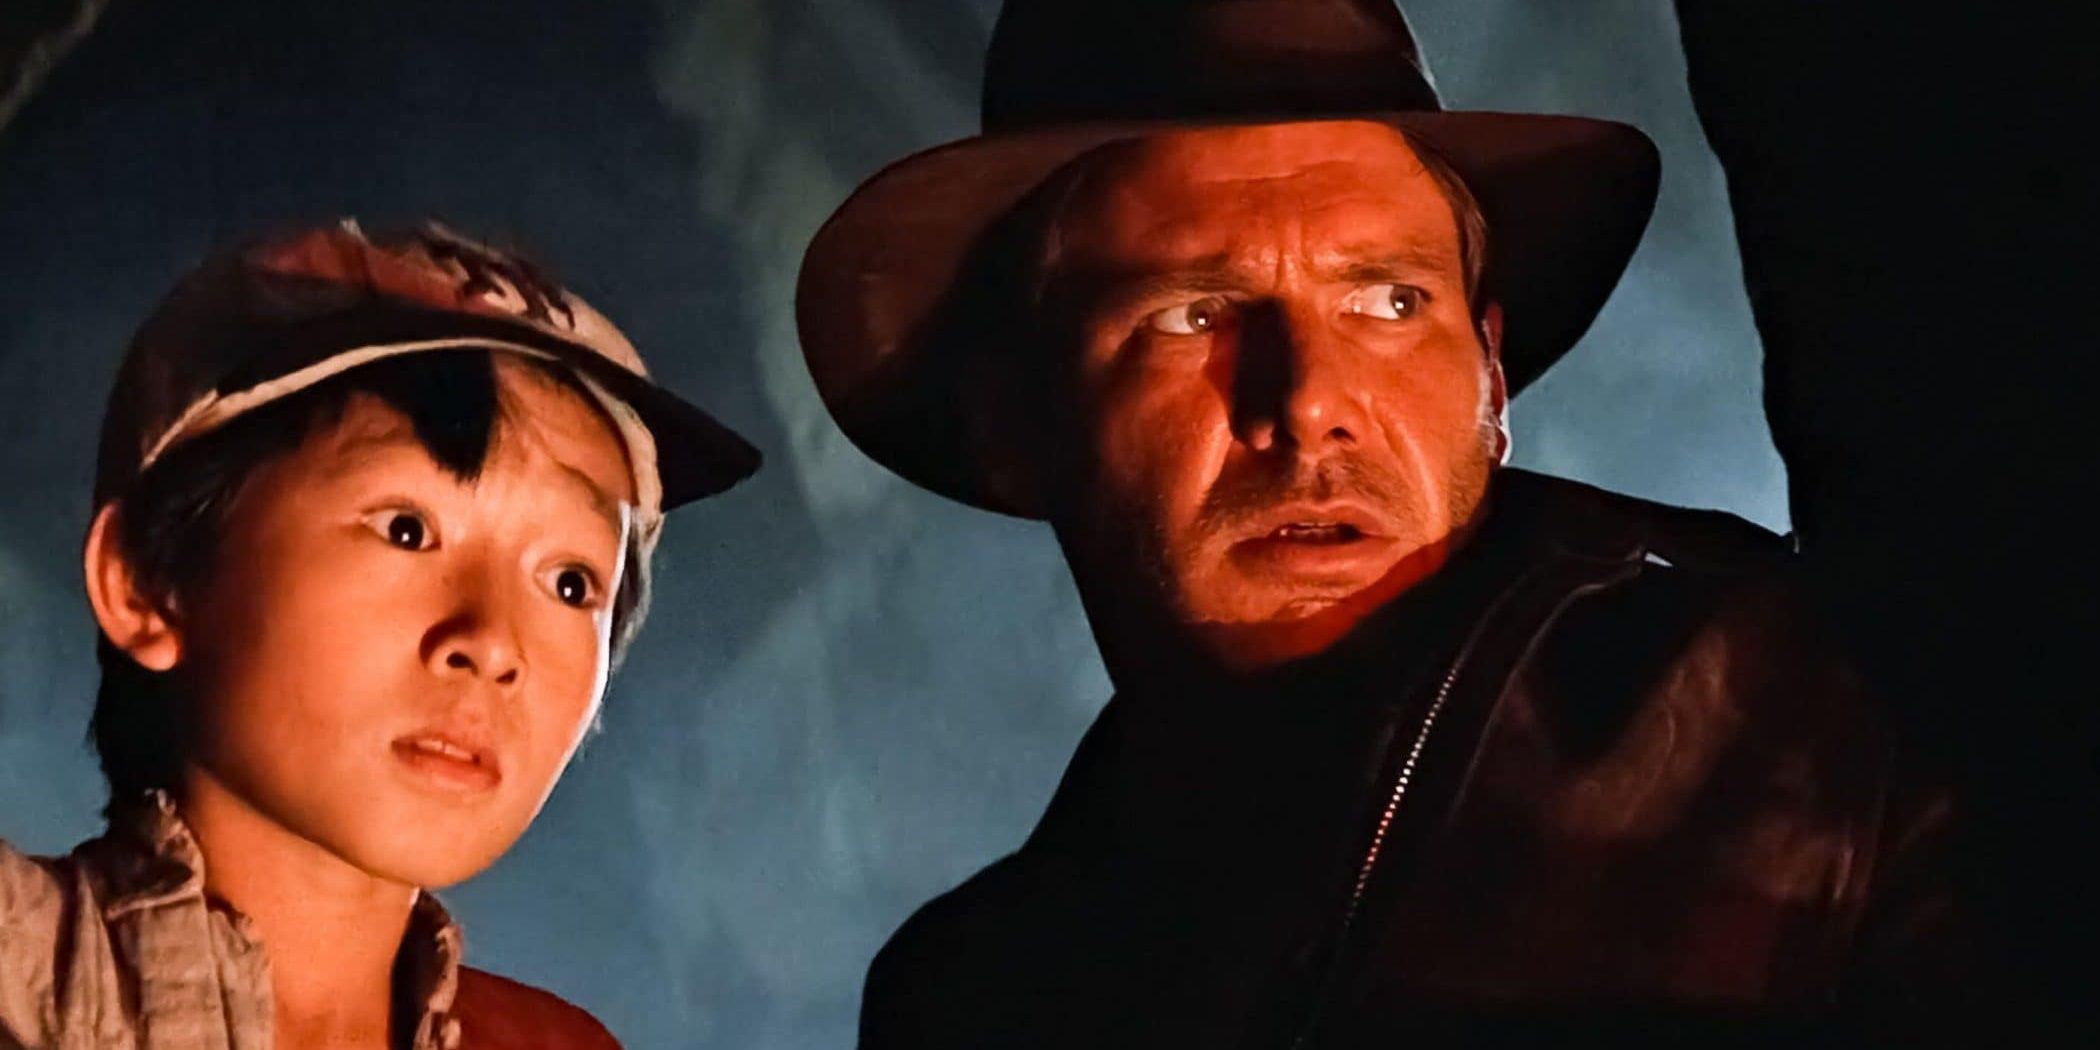 Indiana Jones and Short Round looking concerned in The Temple of Doom